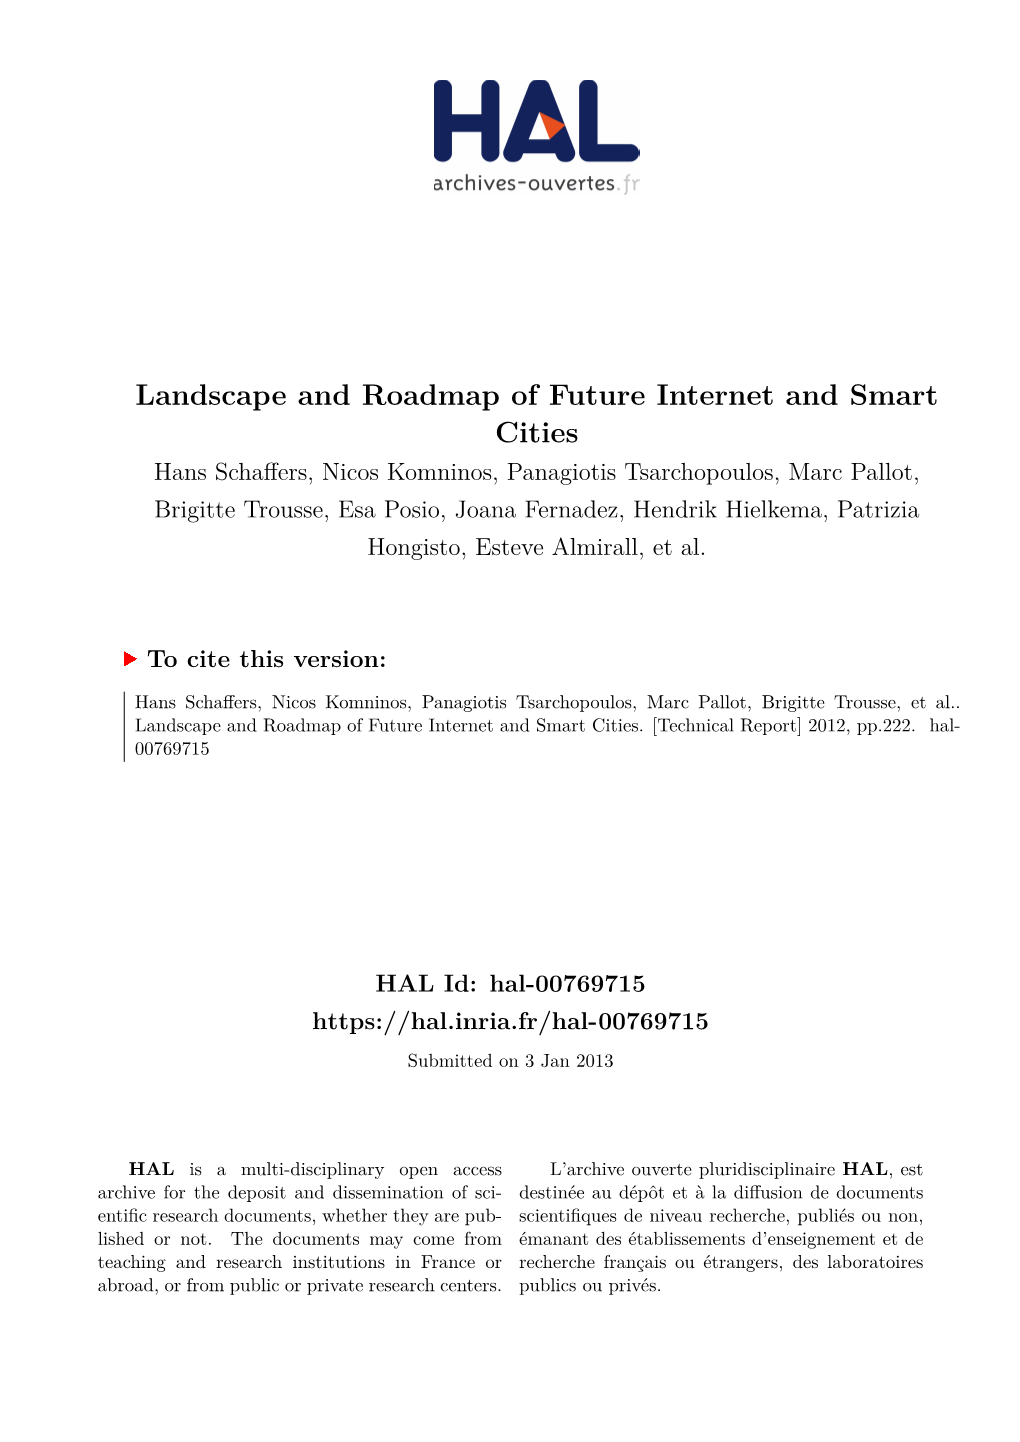 Landscape and Roadmap of Future Internet and Smart Cities